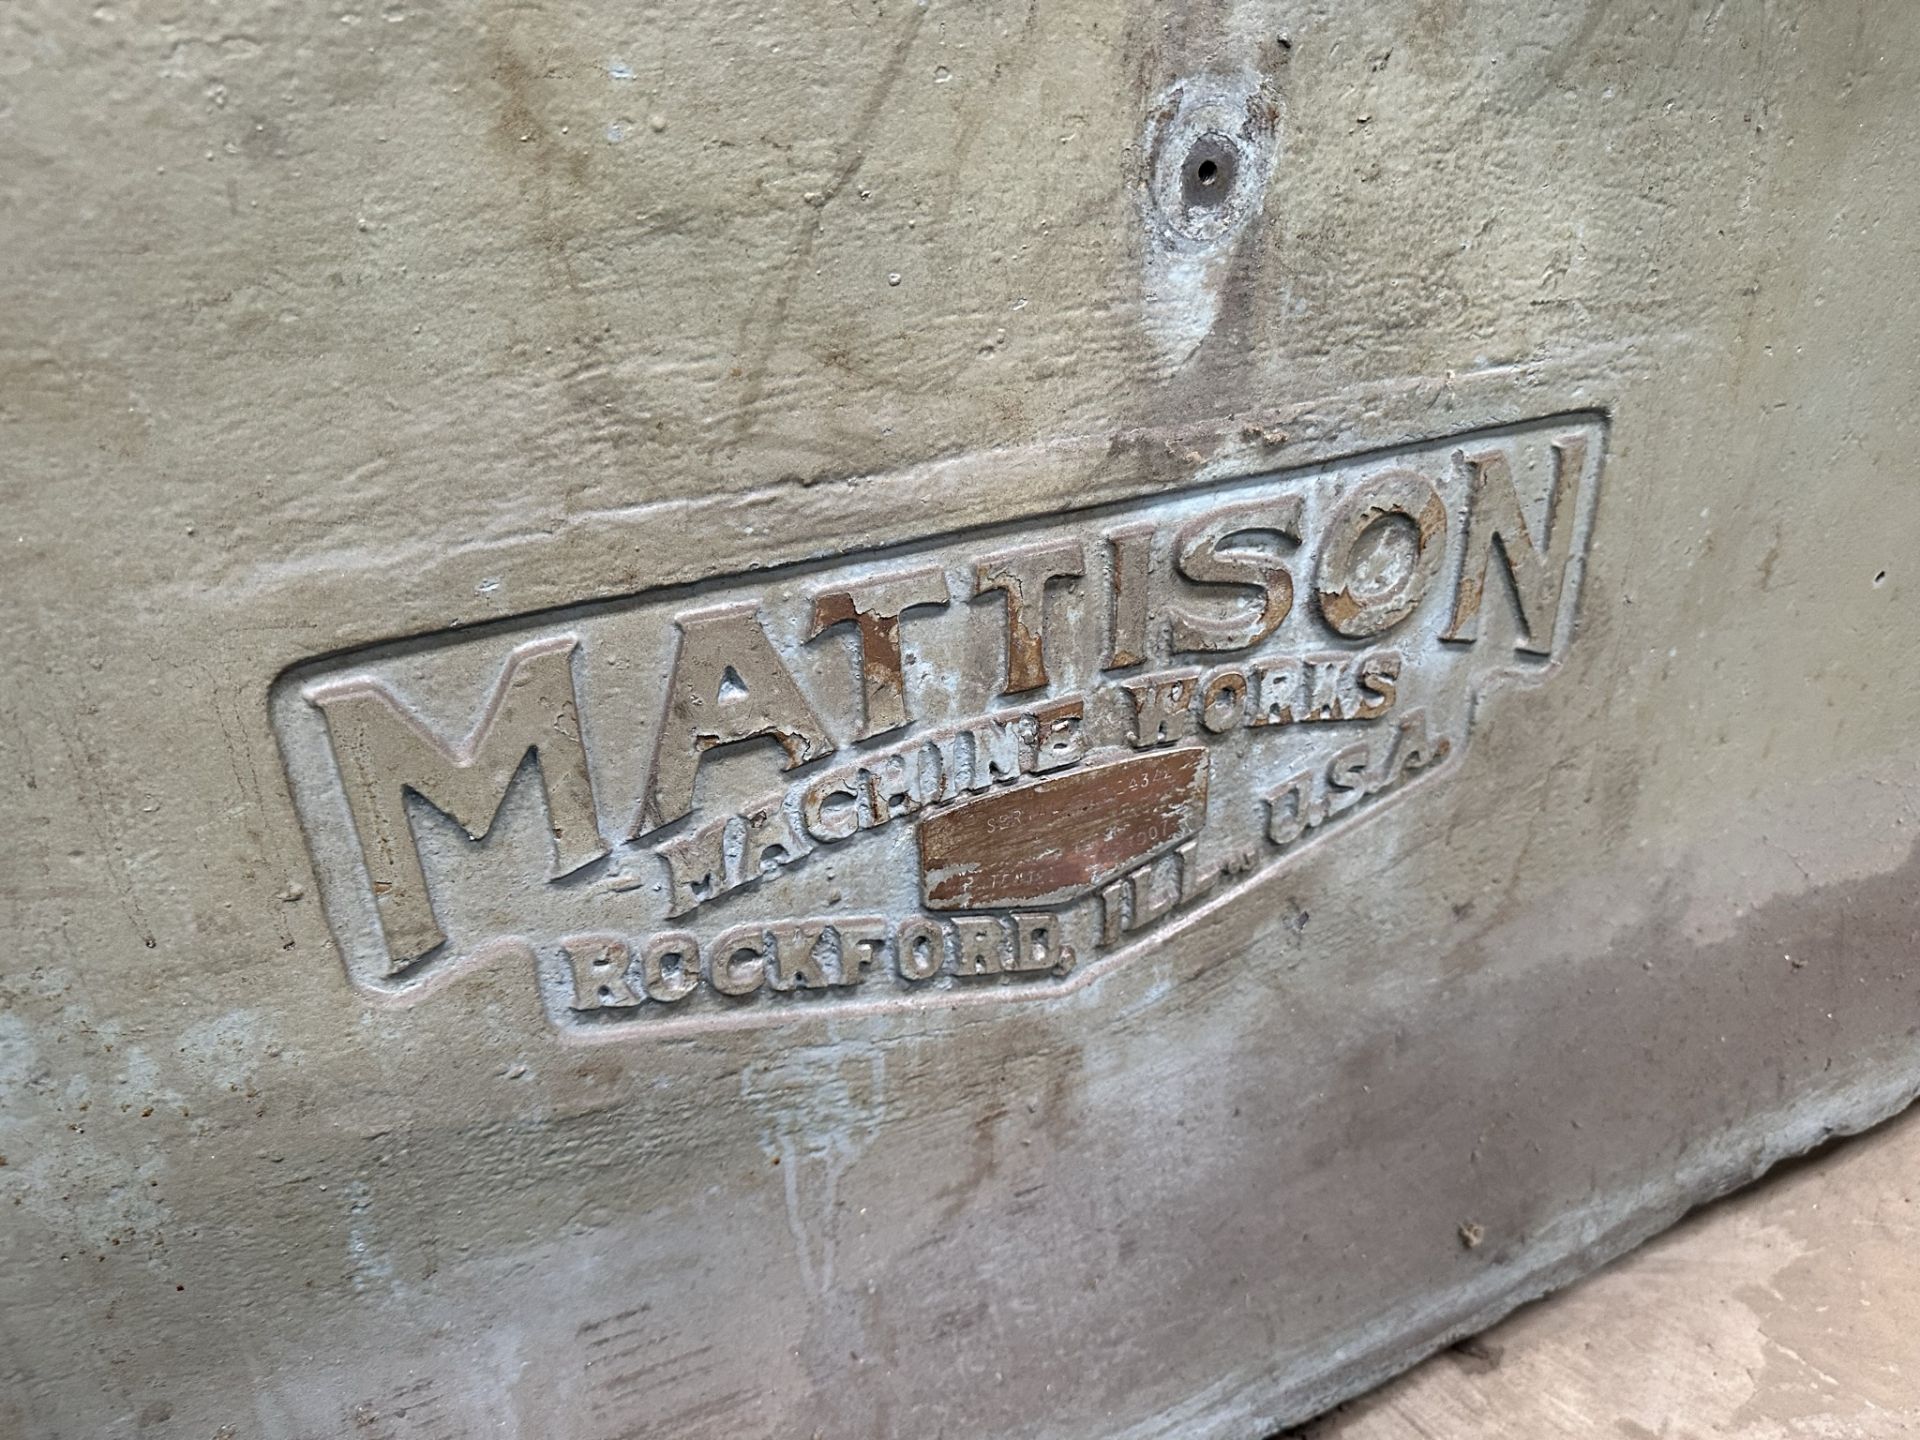 MATTISON SURFACE GRINDER, 104" X 36" WORKING SURFACE, USED, (LOCATION: SANTA FE SPRINGS, CA) - Image 3 of 10